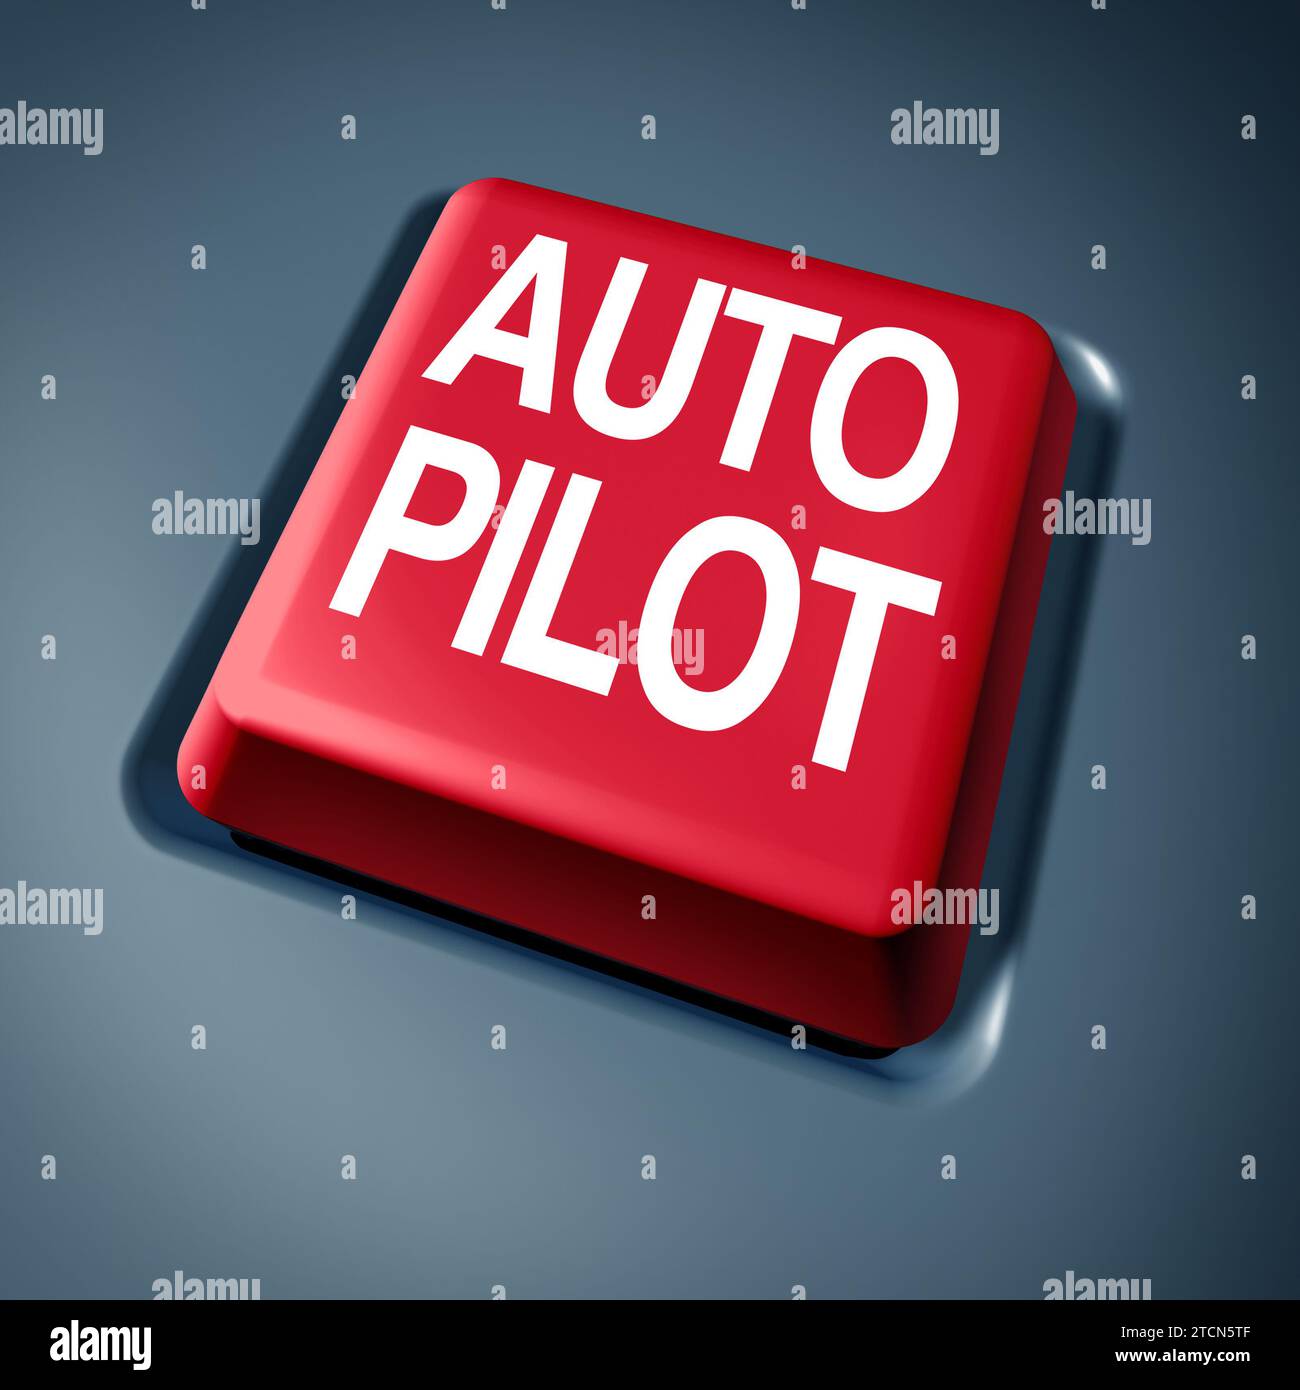 Autopilot And Auto Pilot driverless car driving technology and self driving AI as autonomous vehicle tech transportation as issues of safety and risk Stock Photo